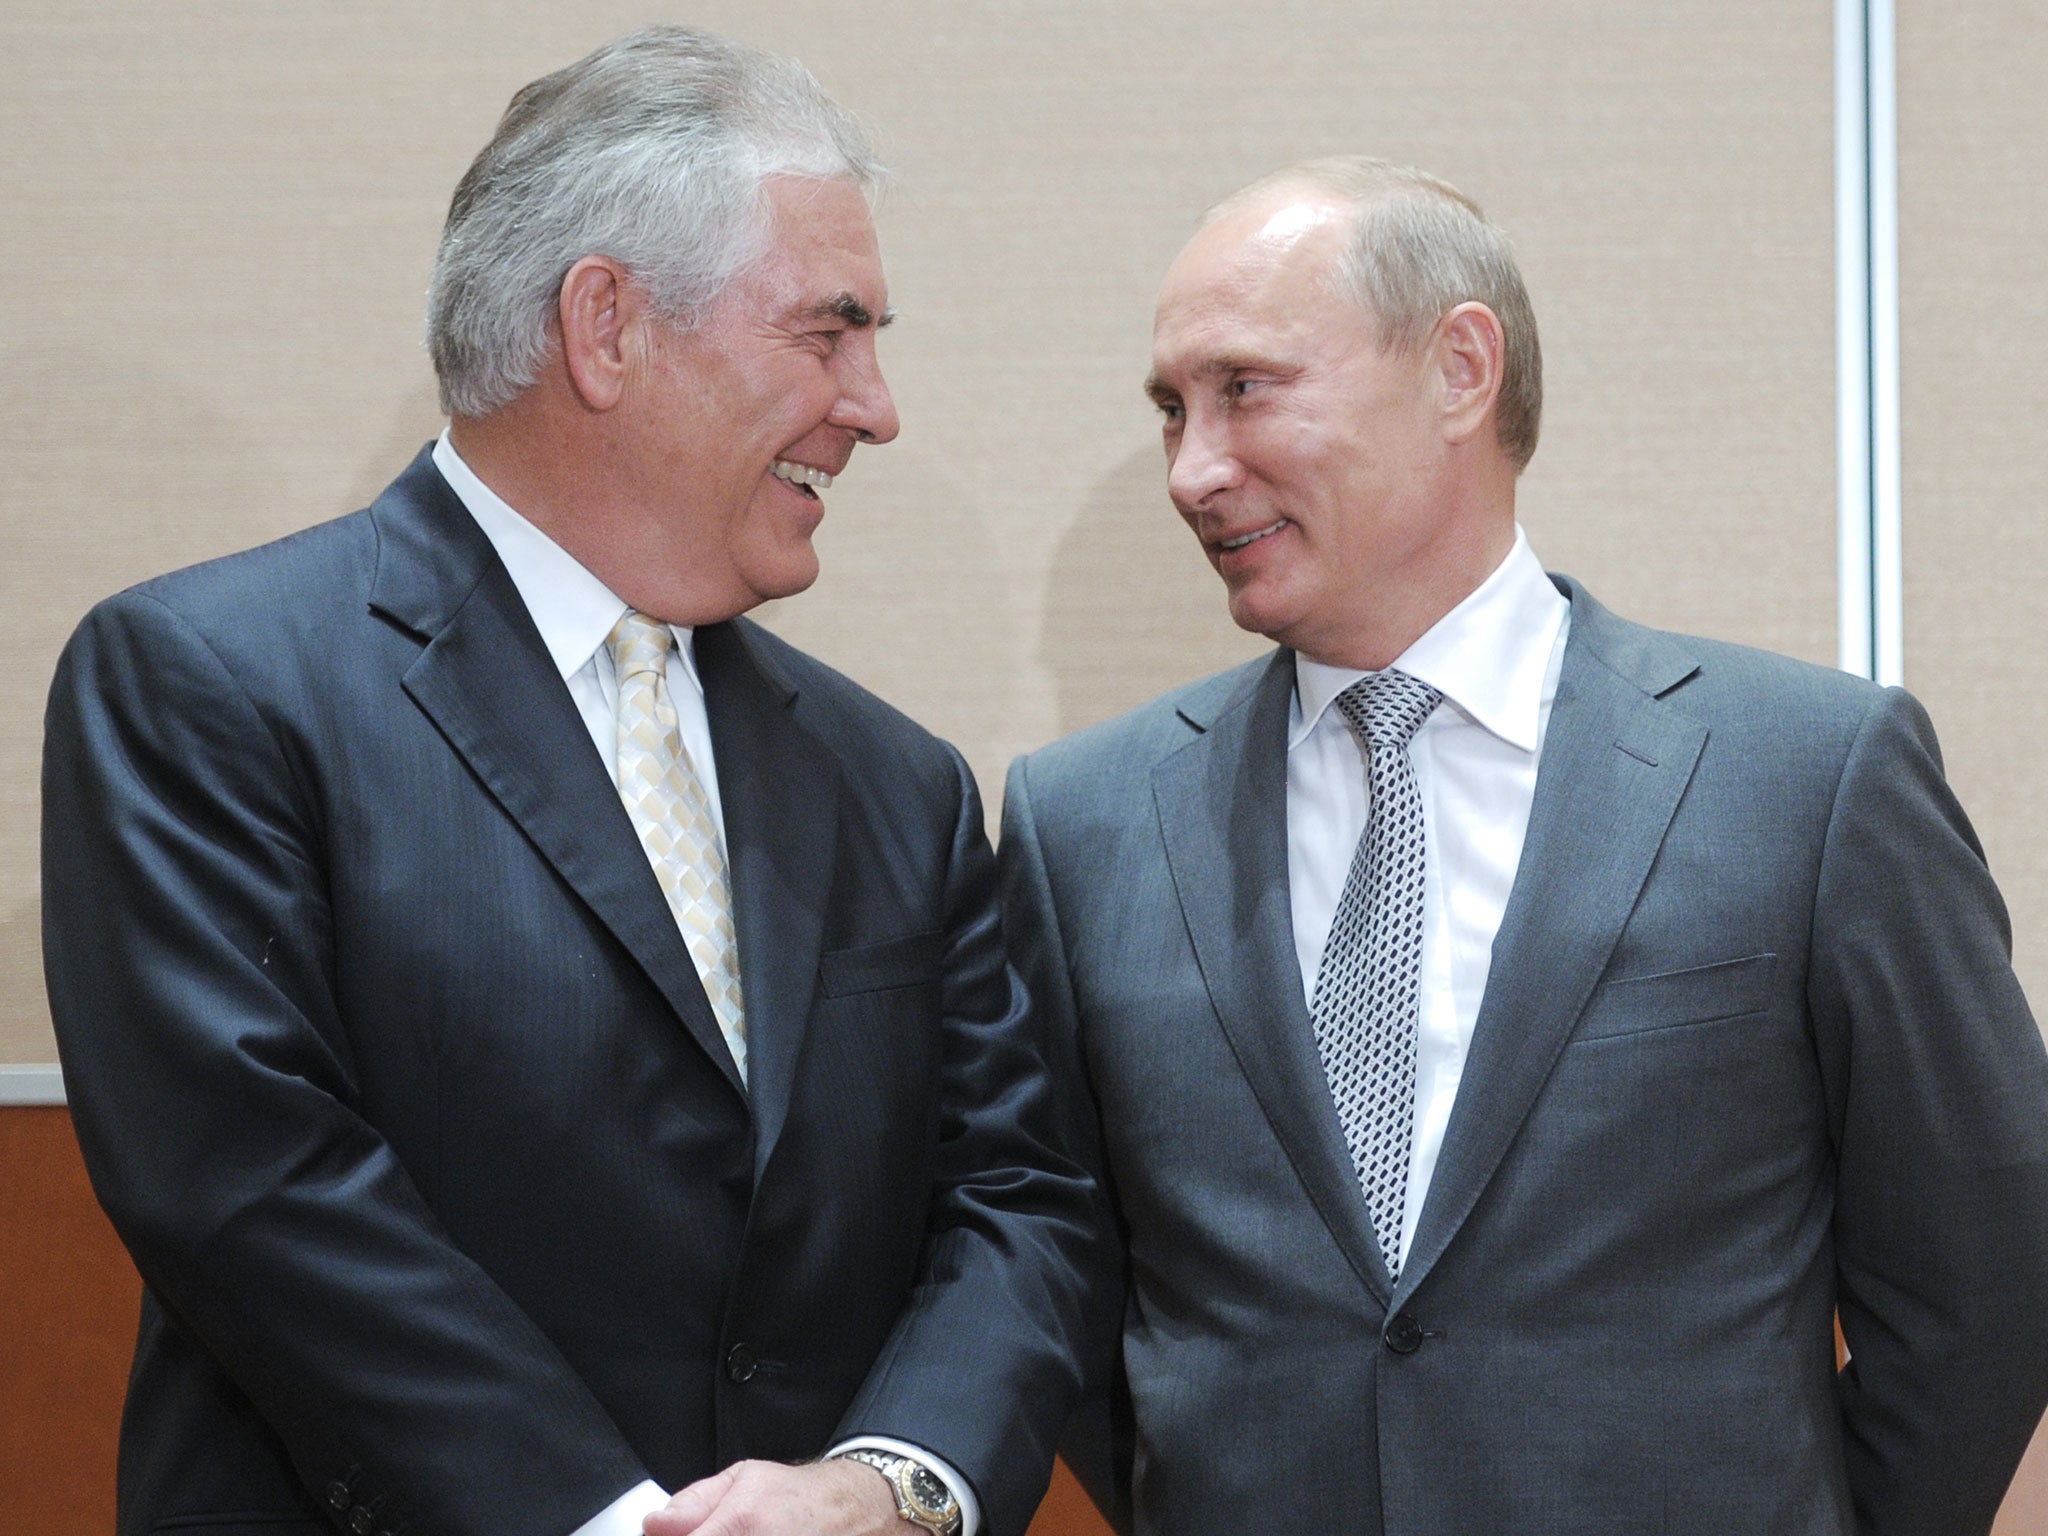 Vladimir Putin speaks with Rex Tillerson during the signing of a Rosneft-ExxonMobil strategic partnership agreement in Sochi in 2011.